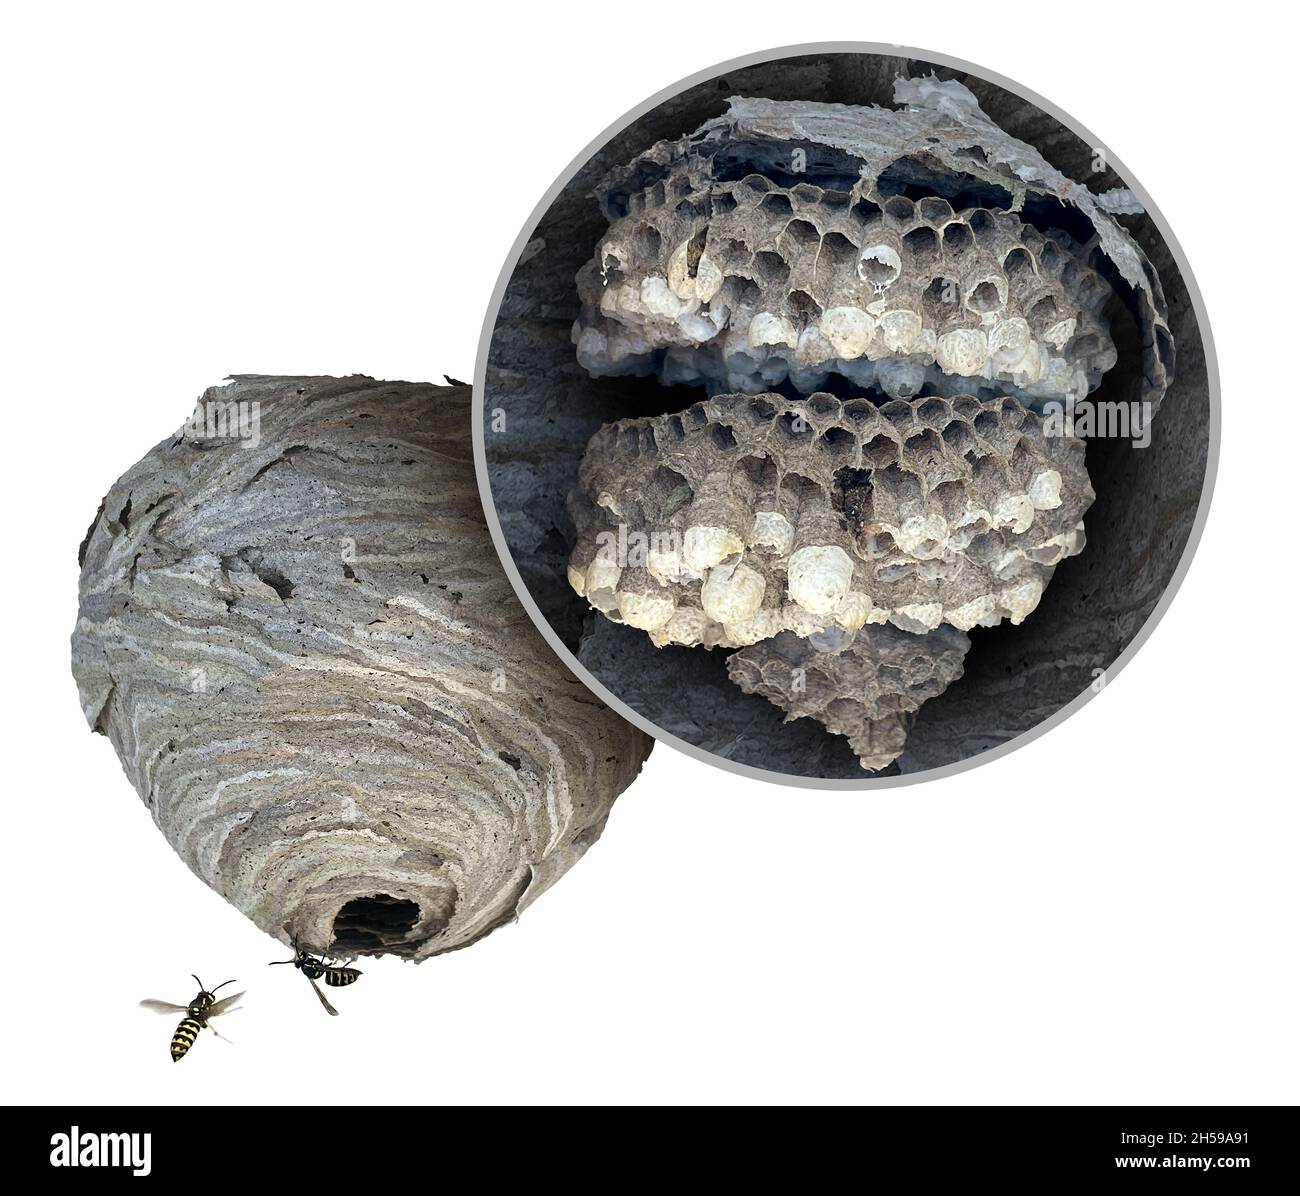 Wasp nest diagram as a gray paper colony of yellow jacket hornets as insects flying and showing the inner structure with the inside as hexagonal. Stock Photo